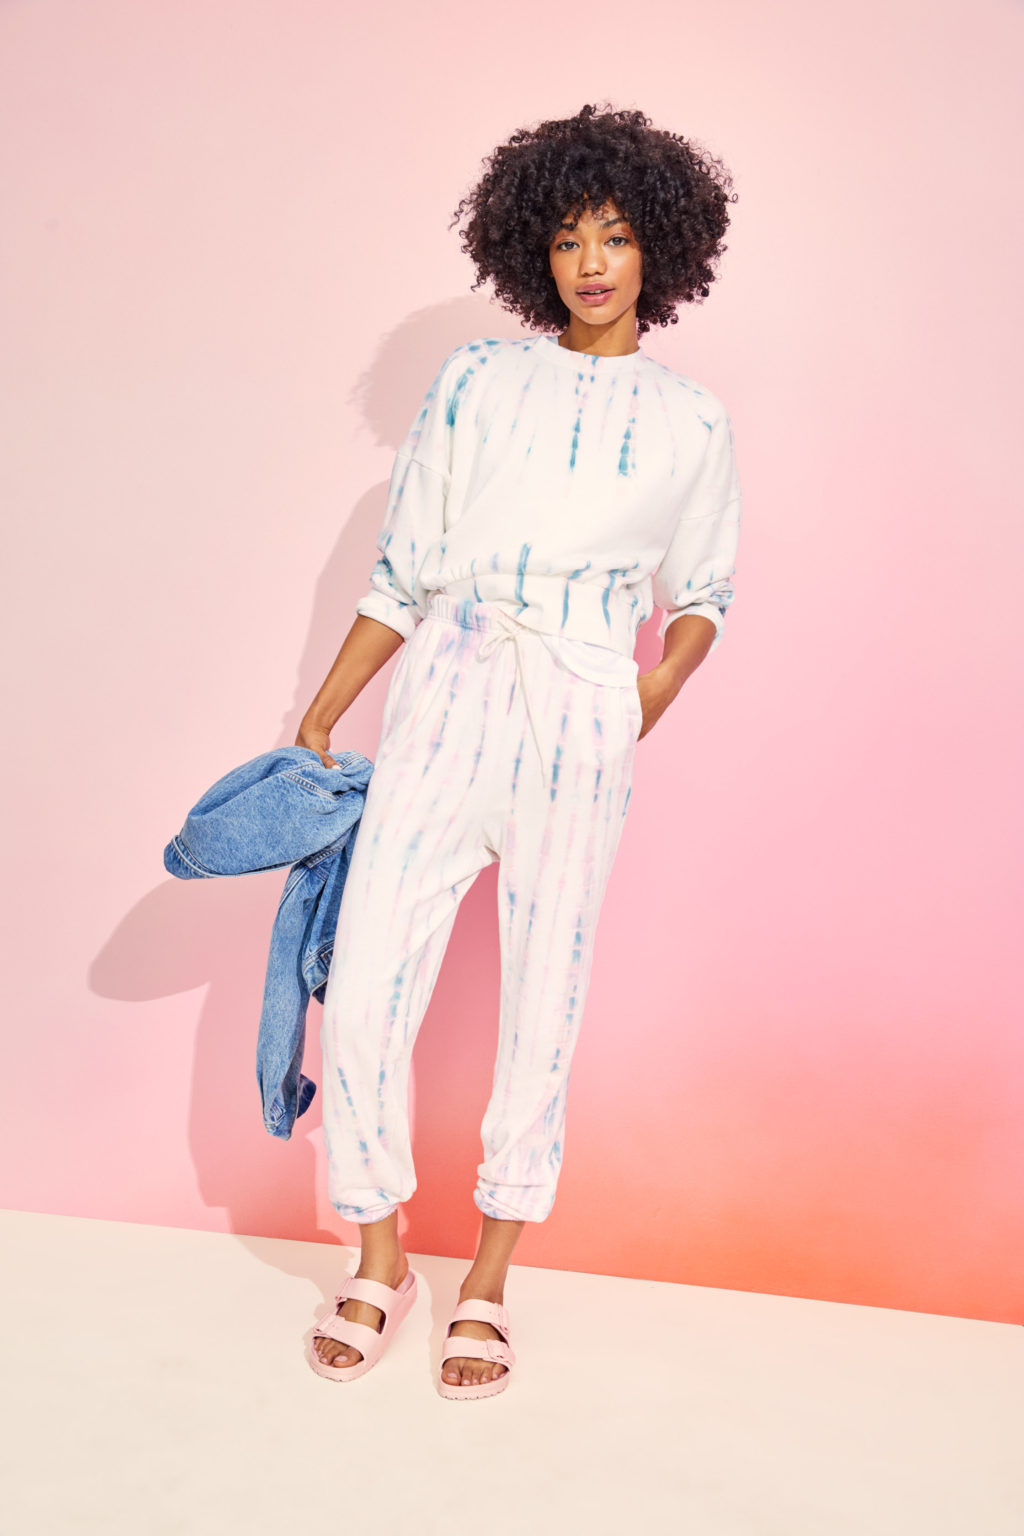 FIRST LOOK Old Navy Spring 2021 Collection and New Arrivals NYC